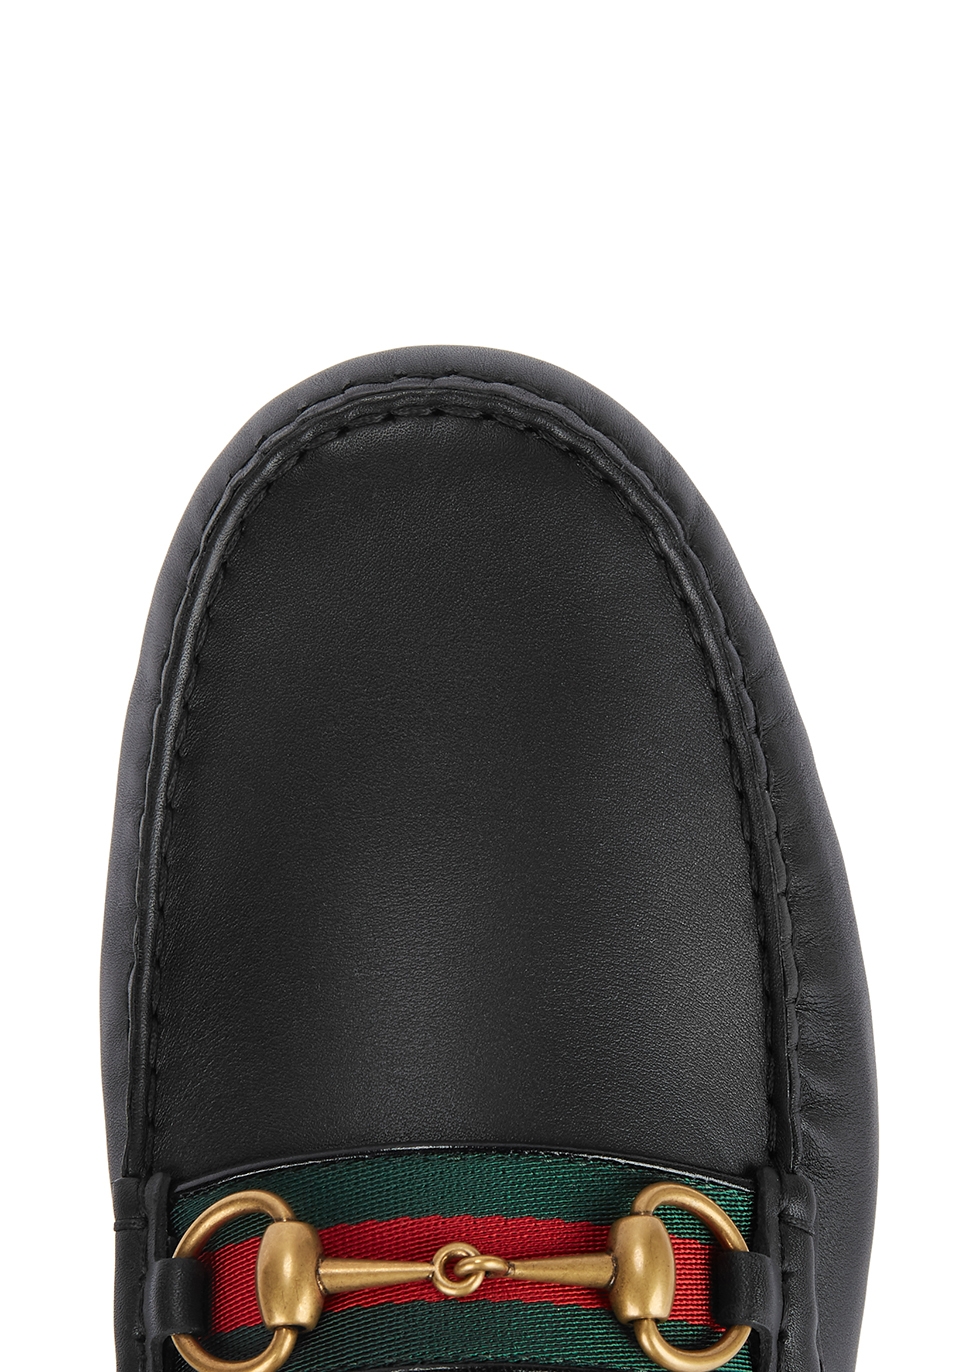 Gucci Kanye black leather driving shoes 